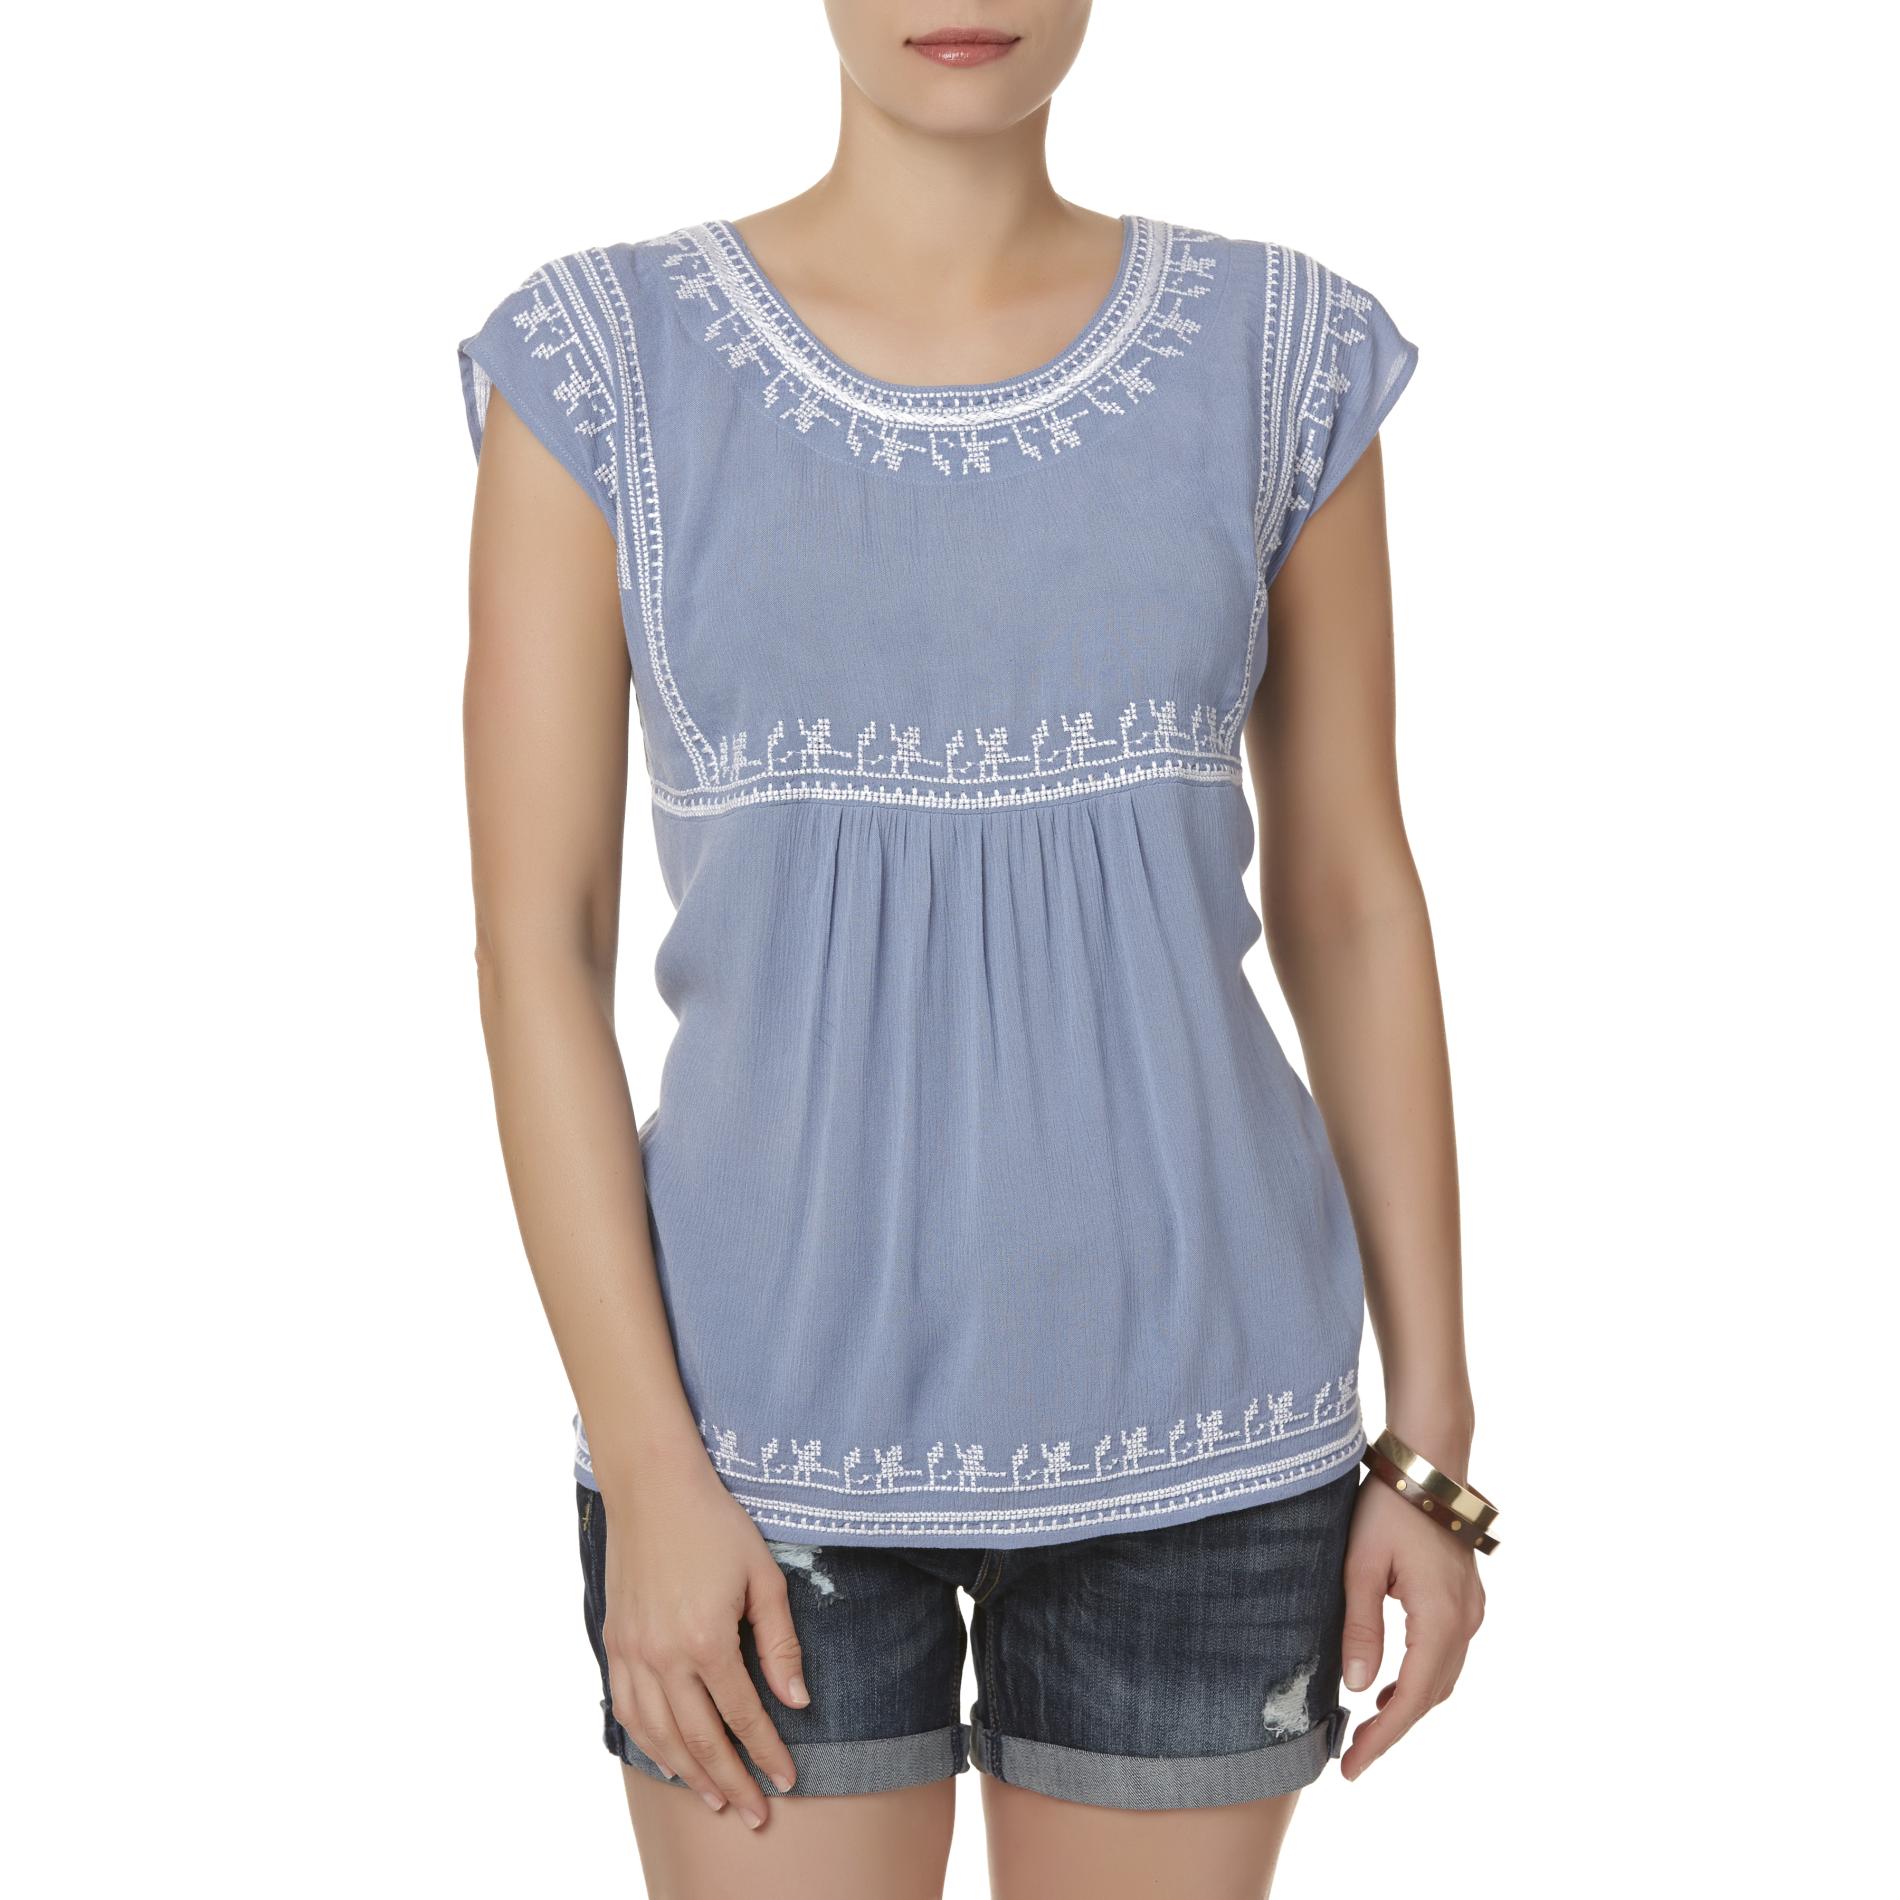 Simply Styled Women's Peasant Top - Tribal